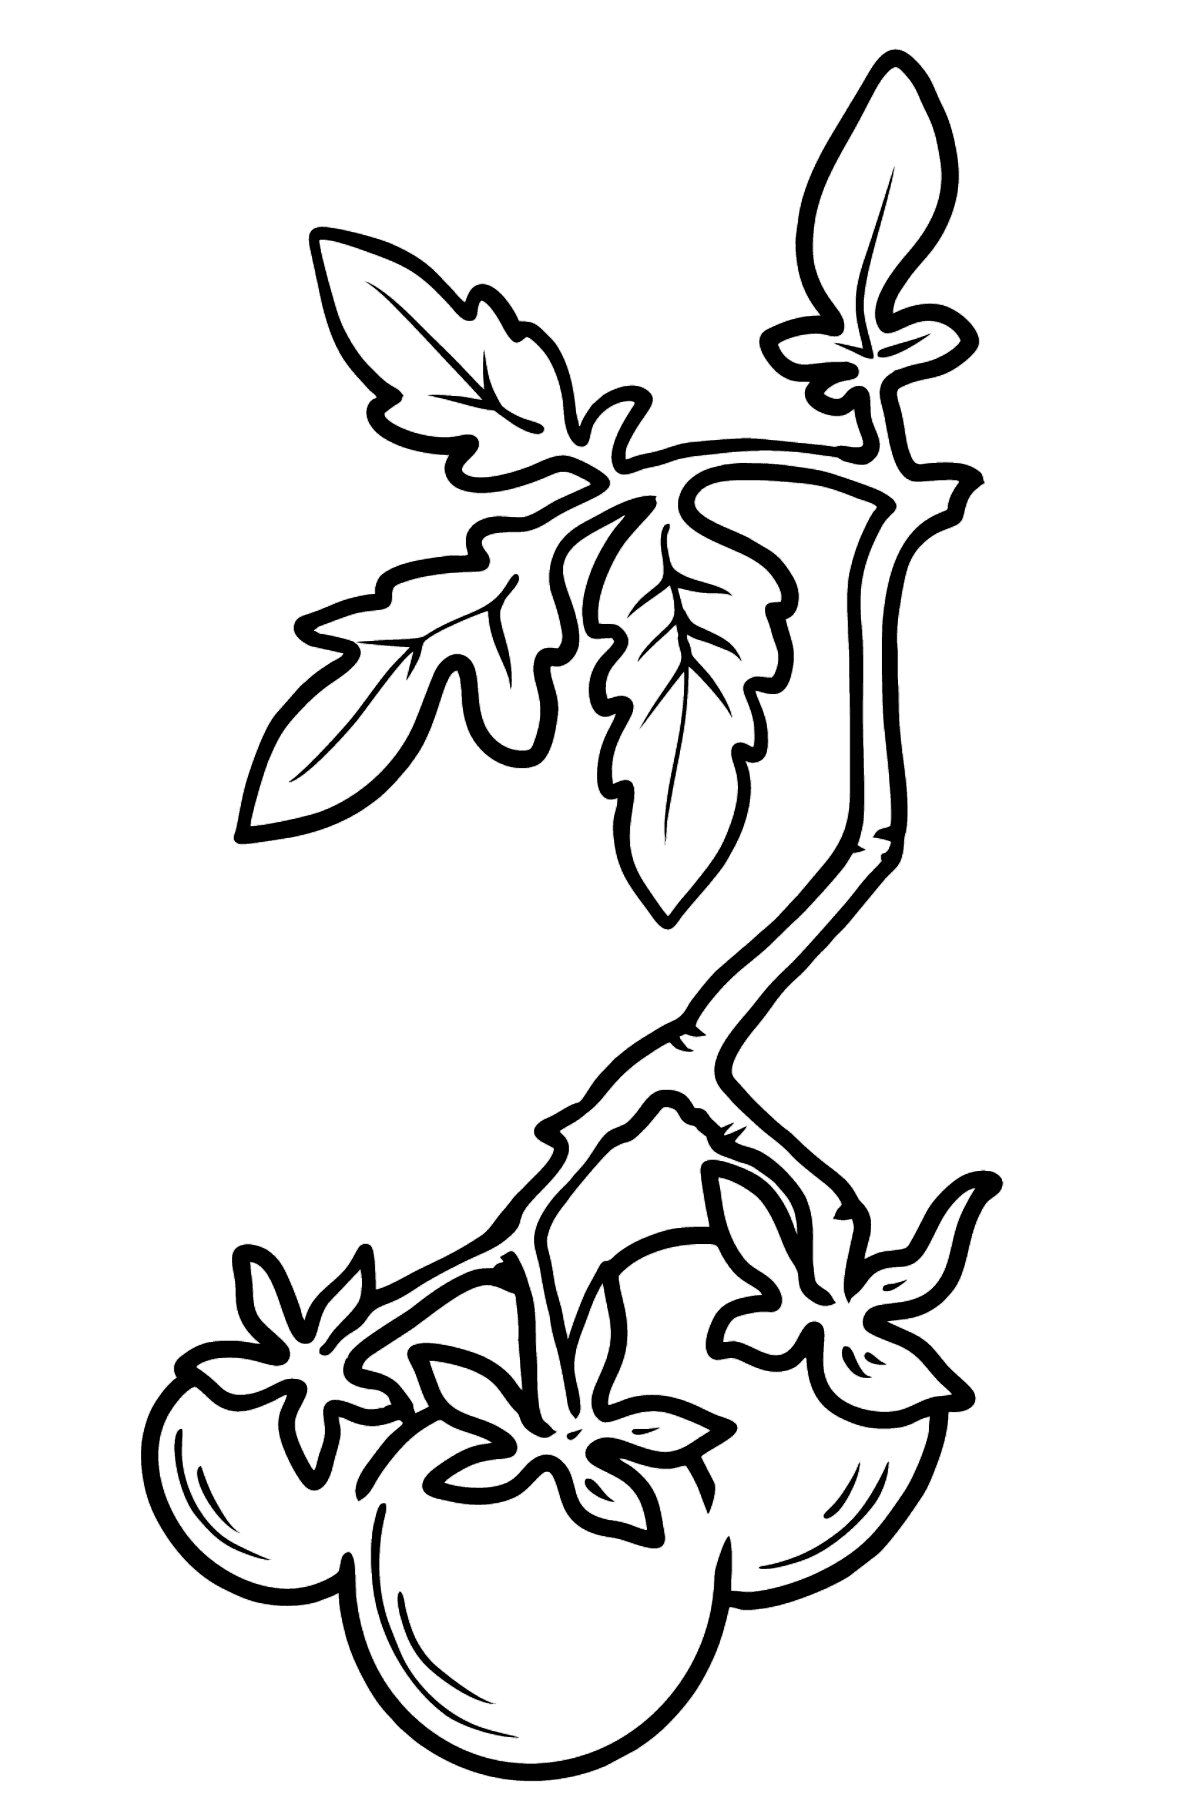 Cherry Tomato coloring page - Coloring Pages for Kids